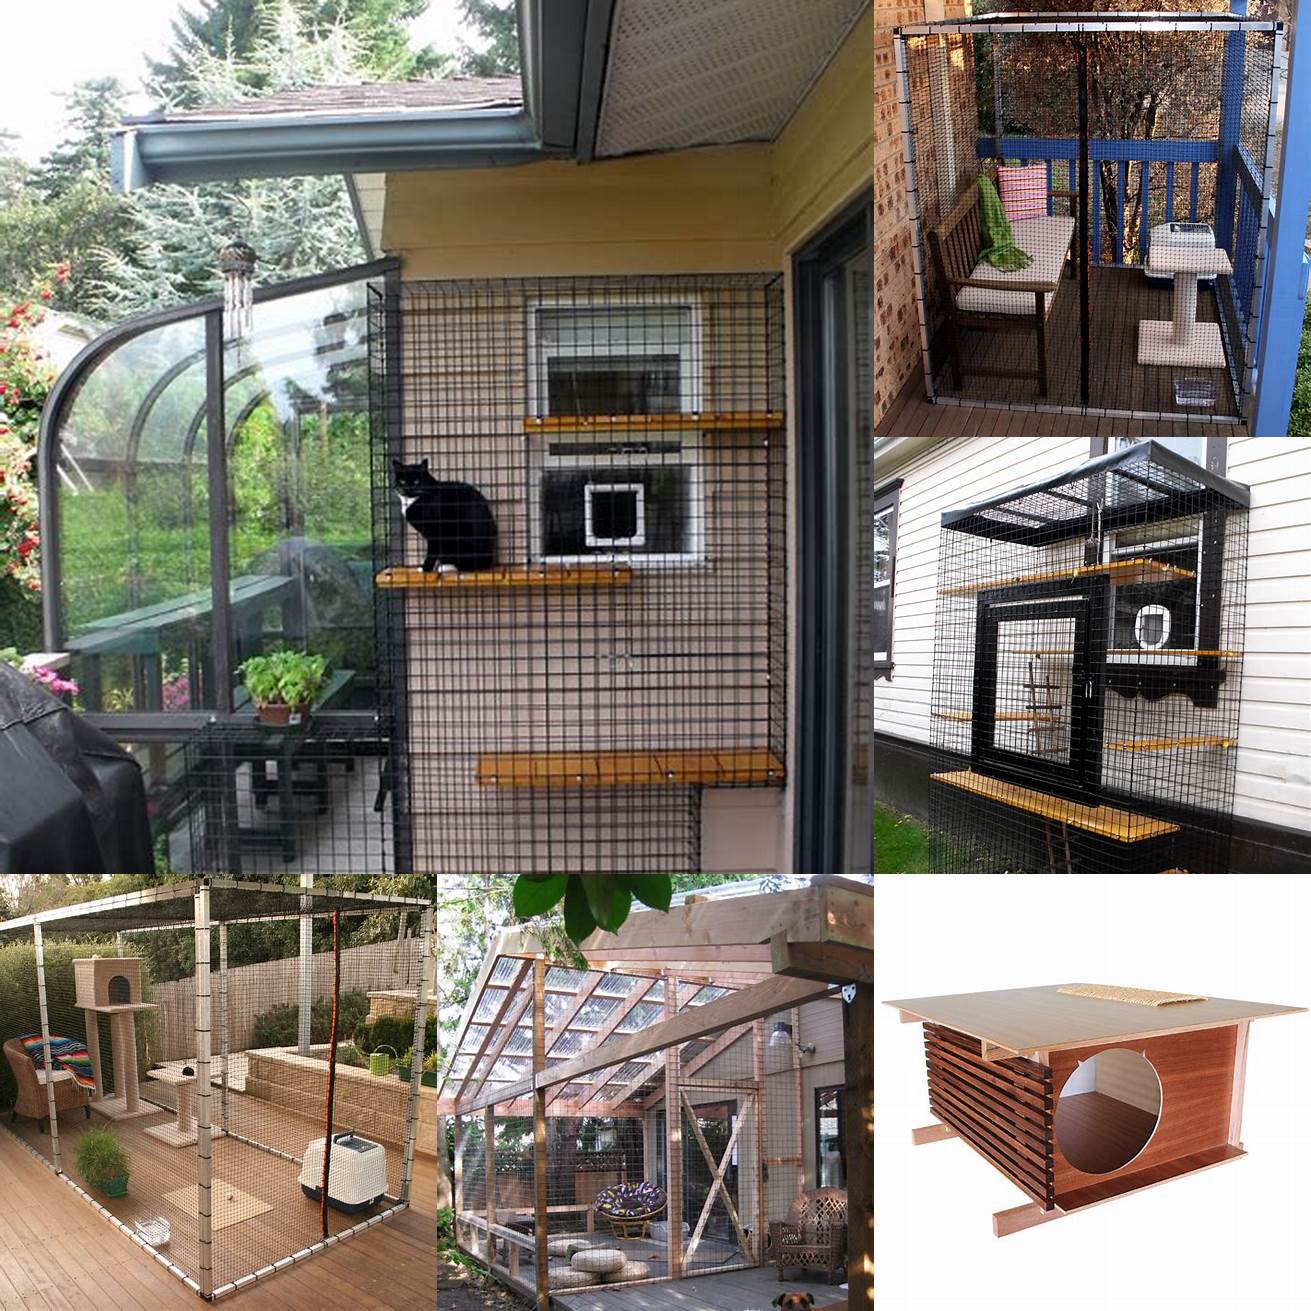 Design Consider the style and design of the enclosure to ensure it complements your homes decor